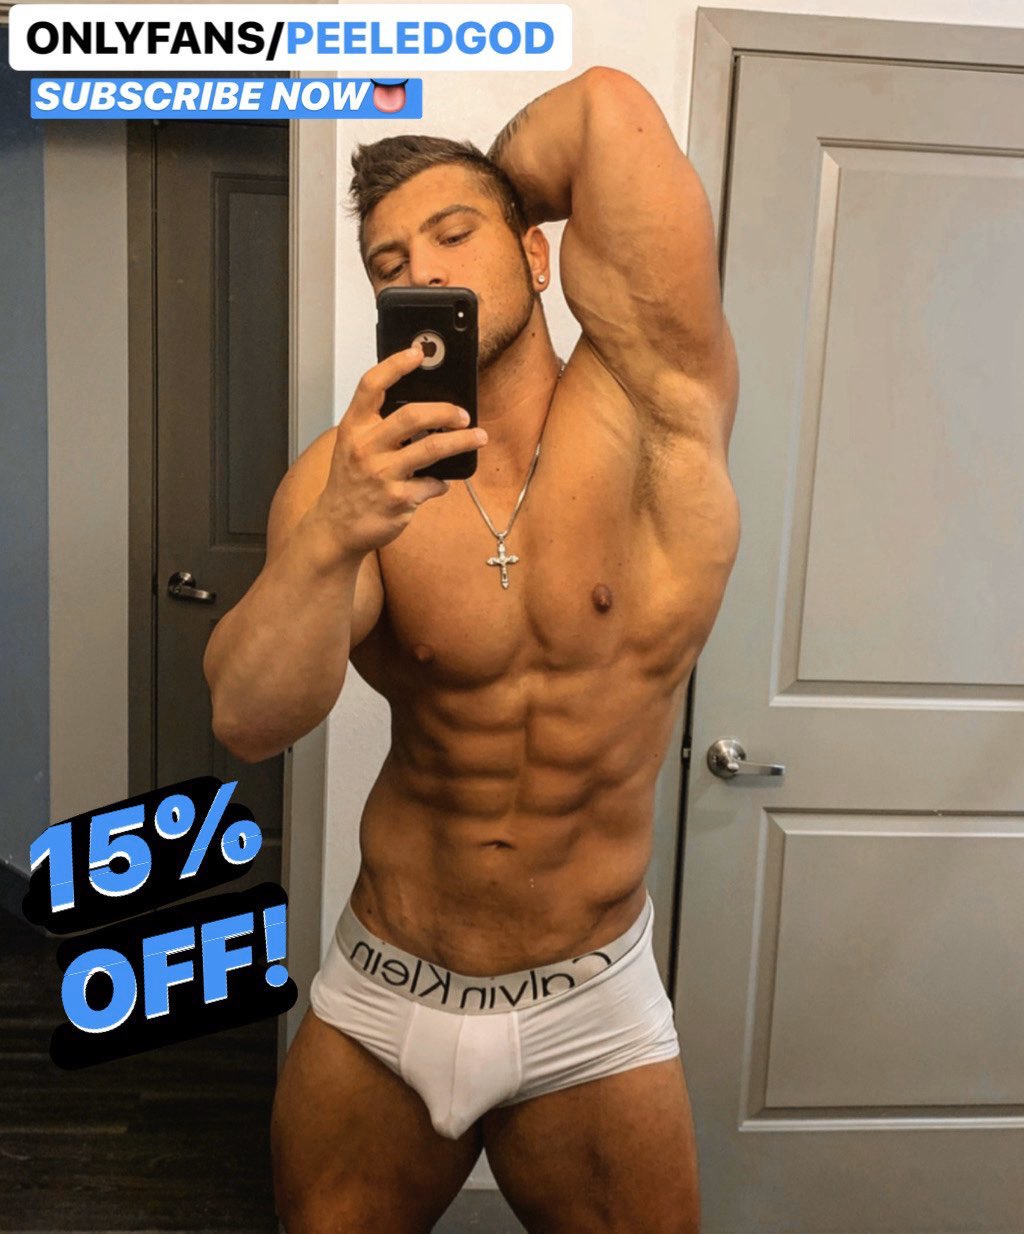 Free onlyfans access